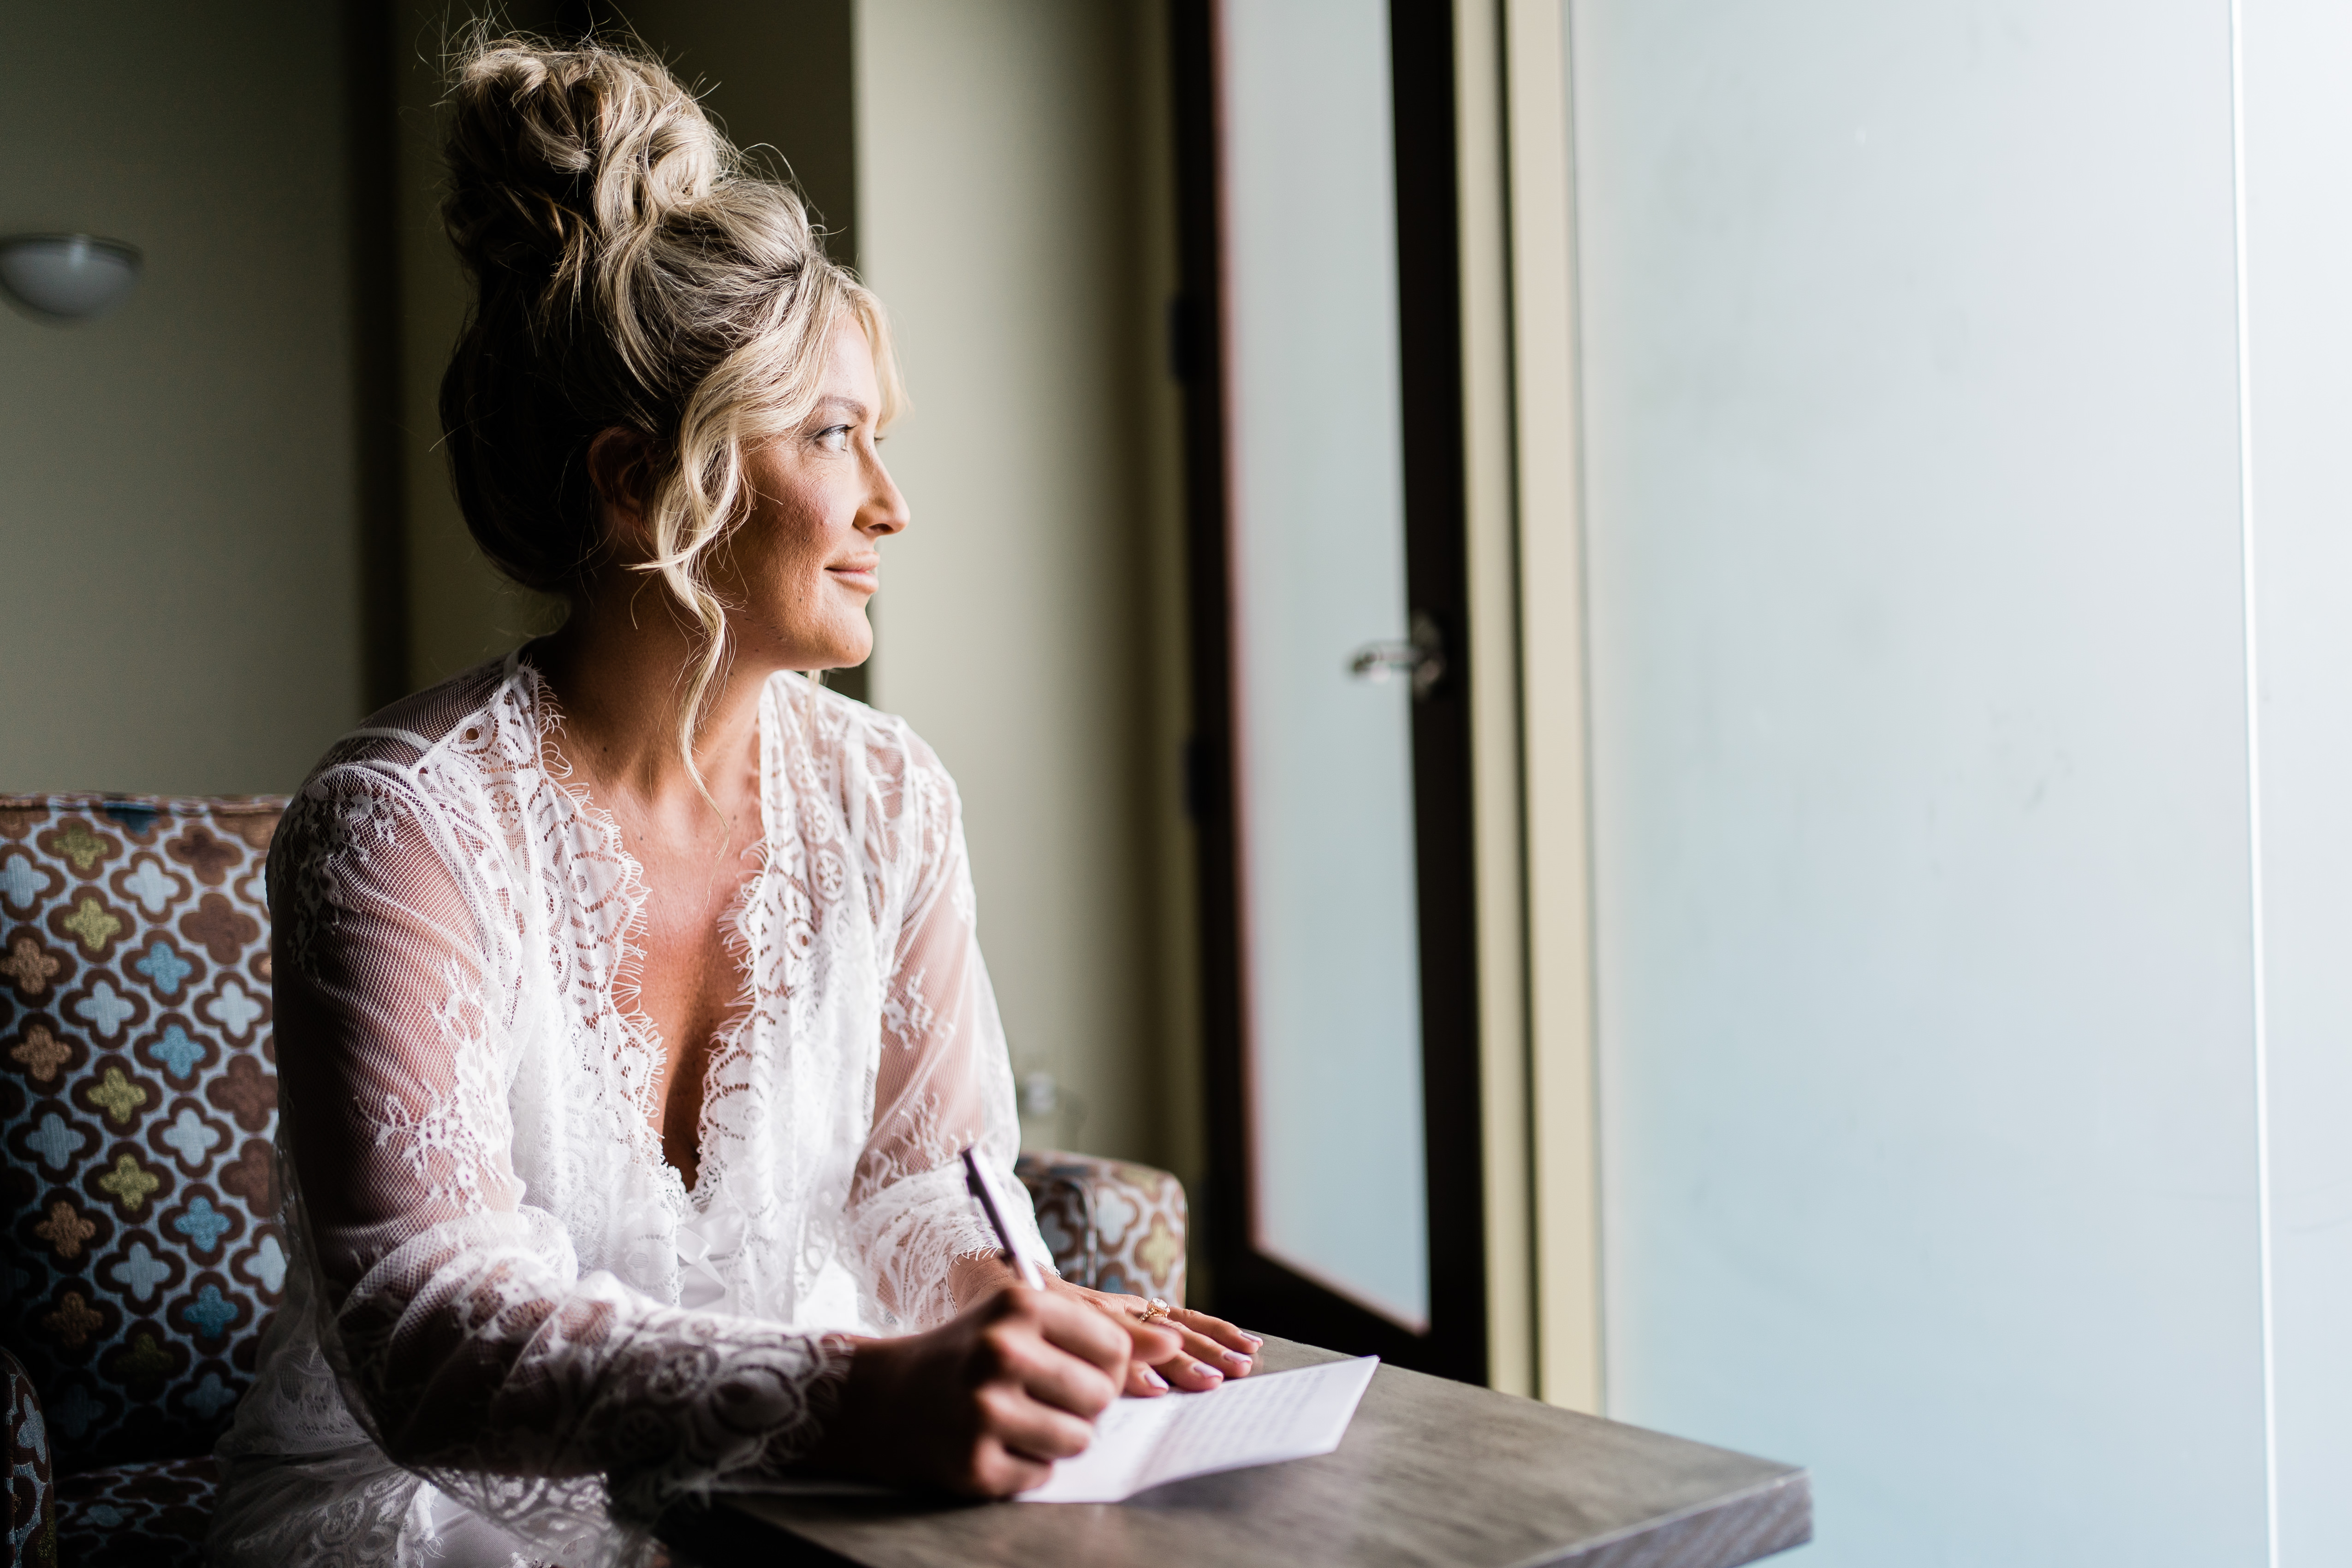 Fort Wayne wedding photographer captures bride writing letter while looking out the window